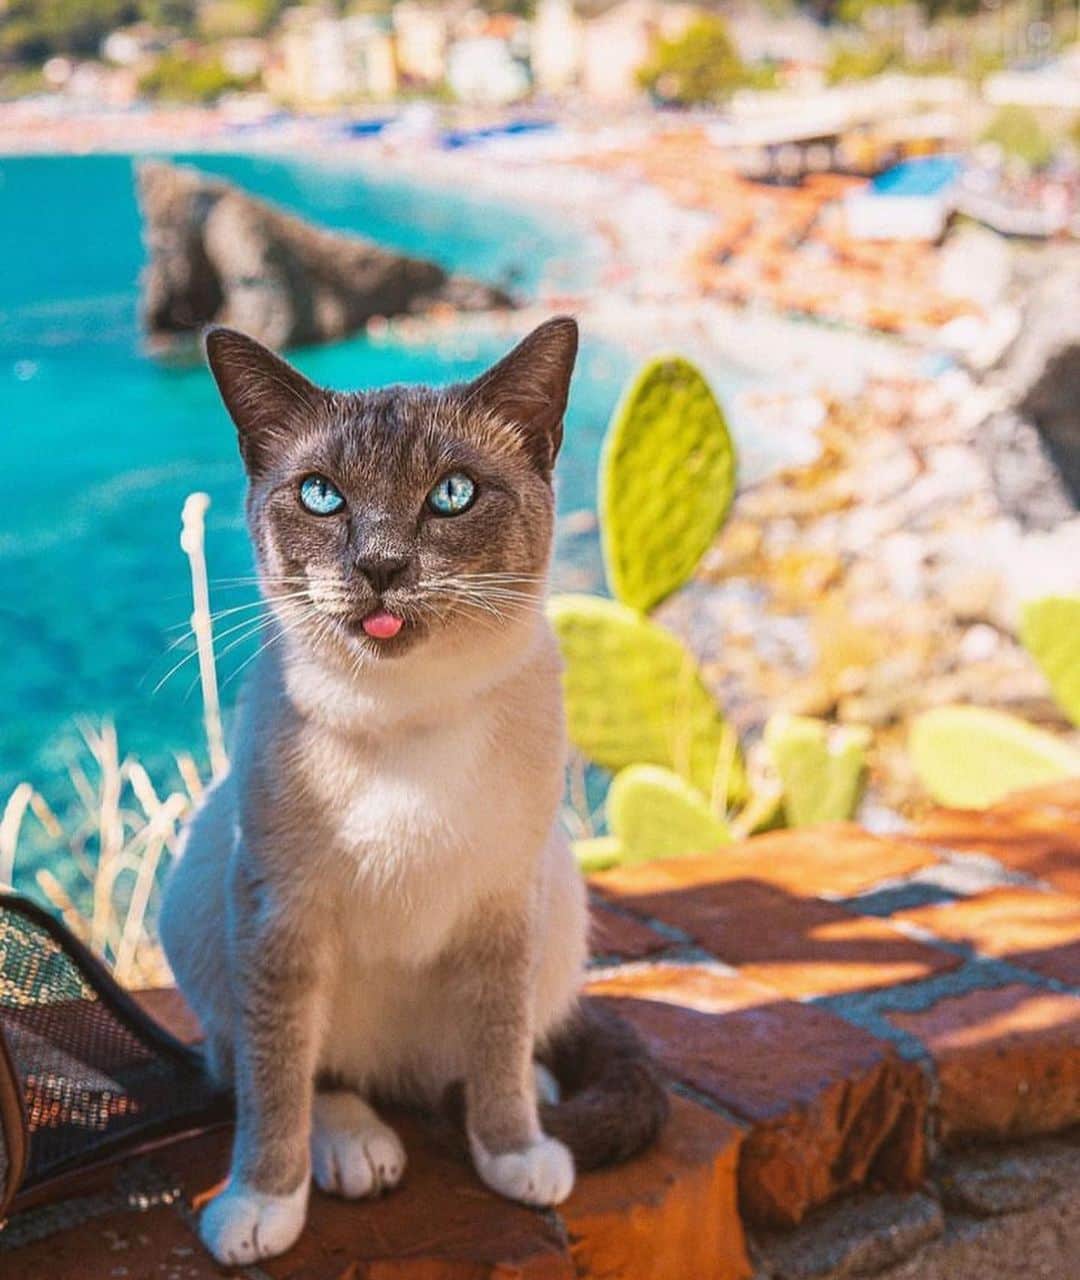 Bolt and Keelのインスタグラム：「Happy #toungeouttuesday 😸👅 Charles here just got back from an amazing trip to Italy! 🇮🇹  @adventrapets ➡️ @charlesthesiam  —————————————————— Follow @adventrapets to meet cute, brave and inspiring adventure pets from all over the world! 🌲🐶🐱🌲  • TAG US IN YOUR POSTS to get your little adventurer featured! #adventrapets ——————————————————」